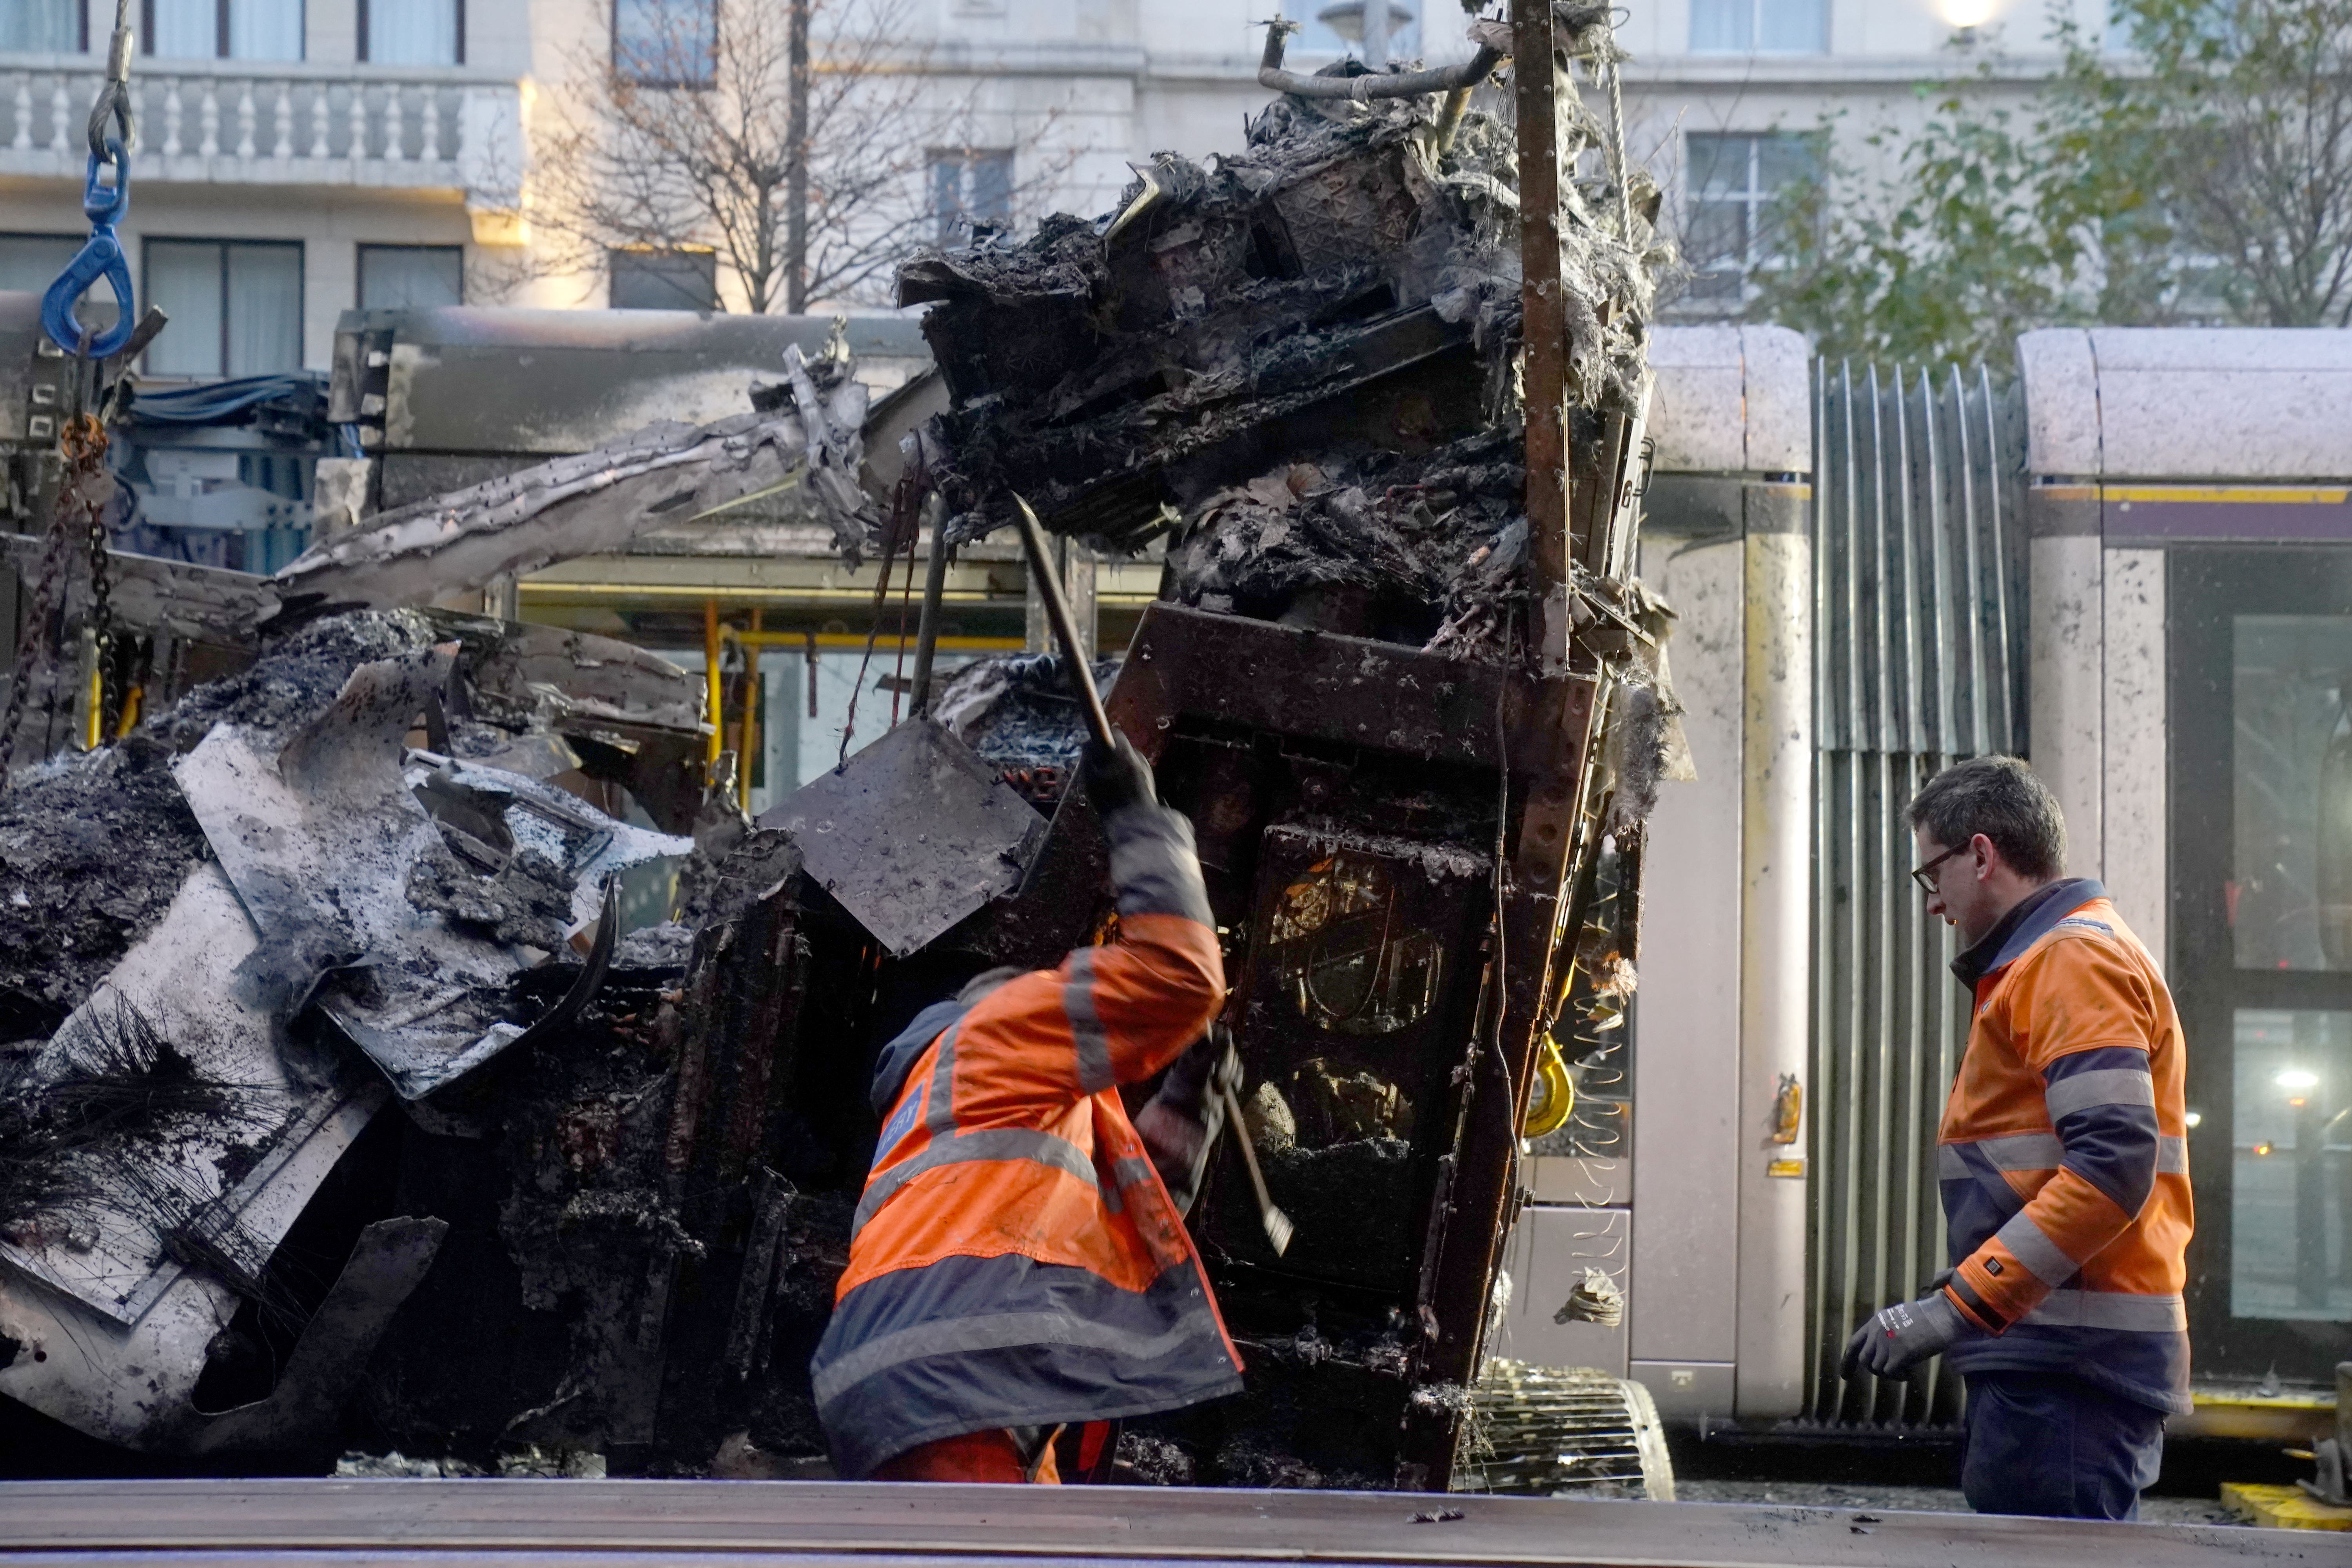 A burned-out bus is removed from O’Connell Street in Dublin, in the aftermath of violent scenes in the city centre on Thursday